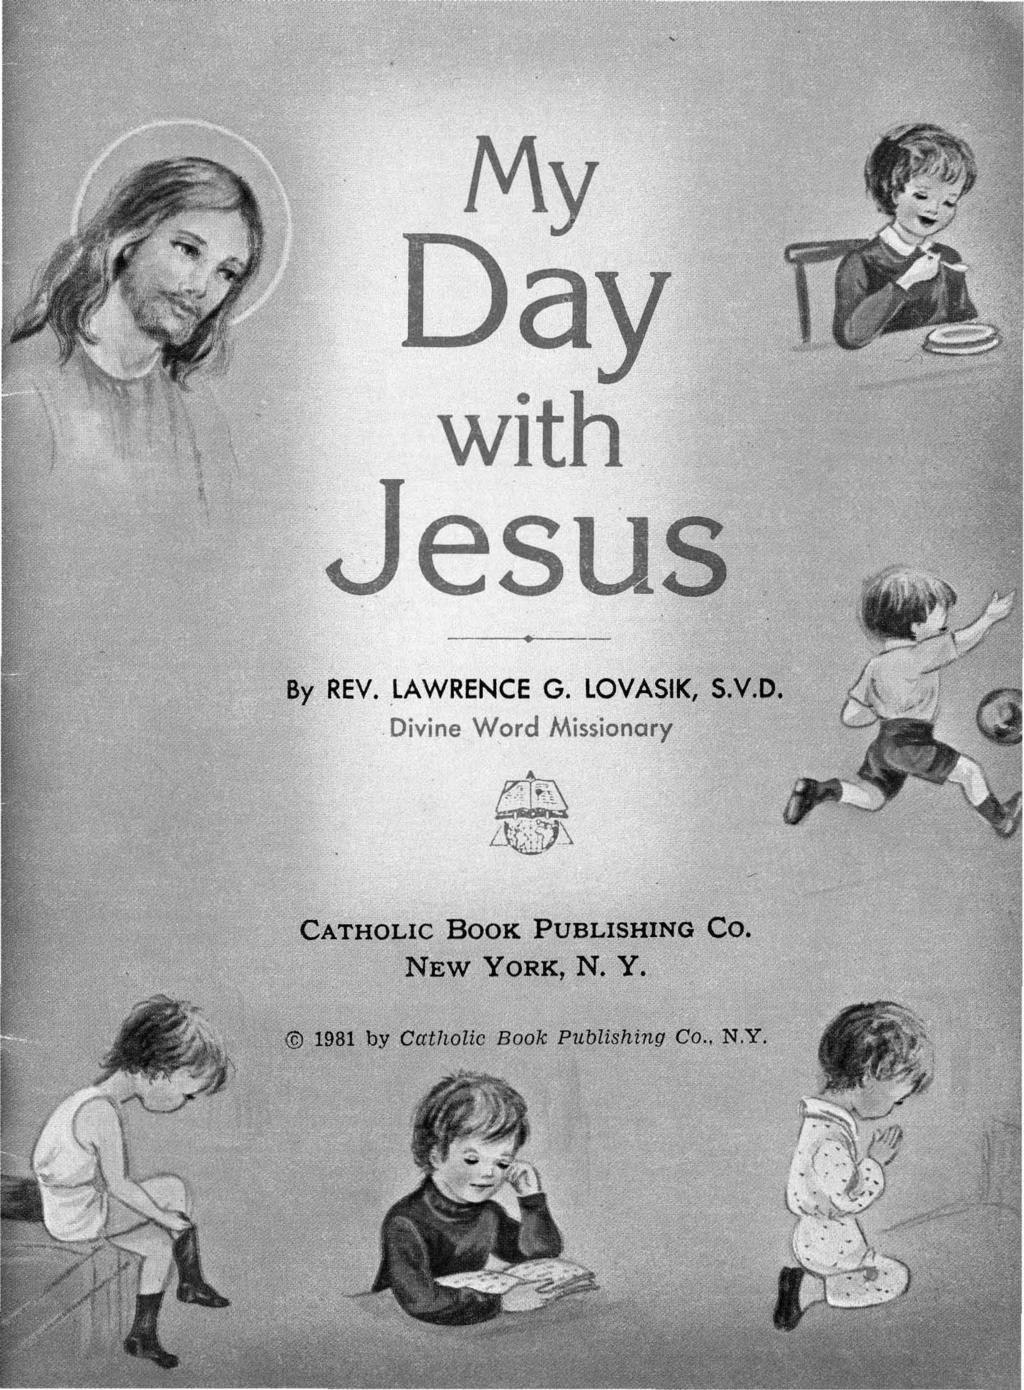 My Day with. Jesus By REV. LAWRENCE G. LOVASIK, S.V.D. Divine Word Missionary CATHOLIC BOOK PUBLISHING CO.